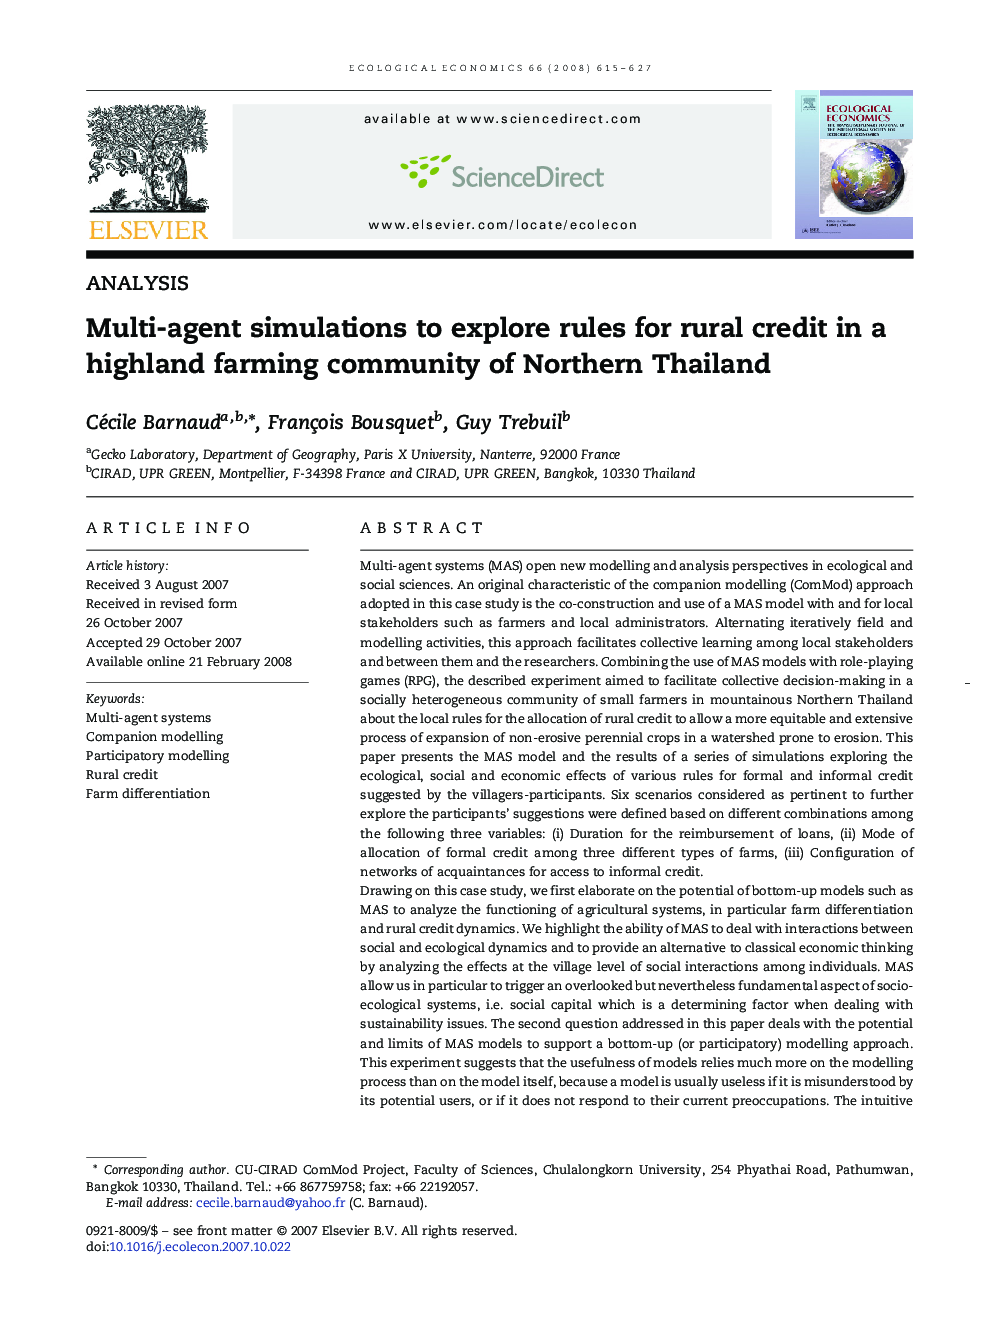 Multi-agent simulations to explore rules for rural credit in a highland farming community of Northern Thailand